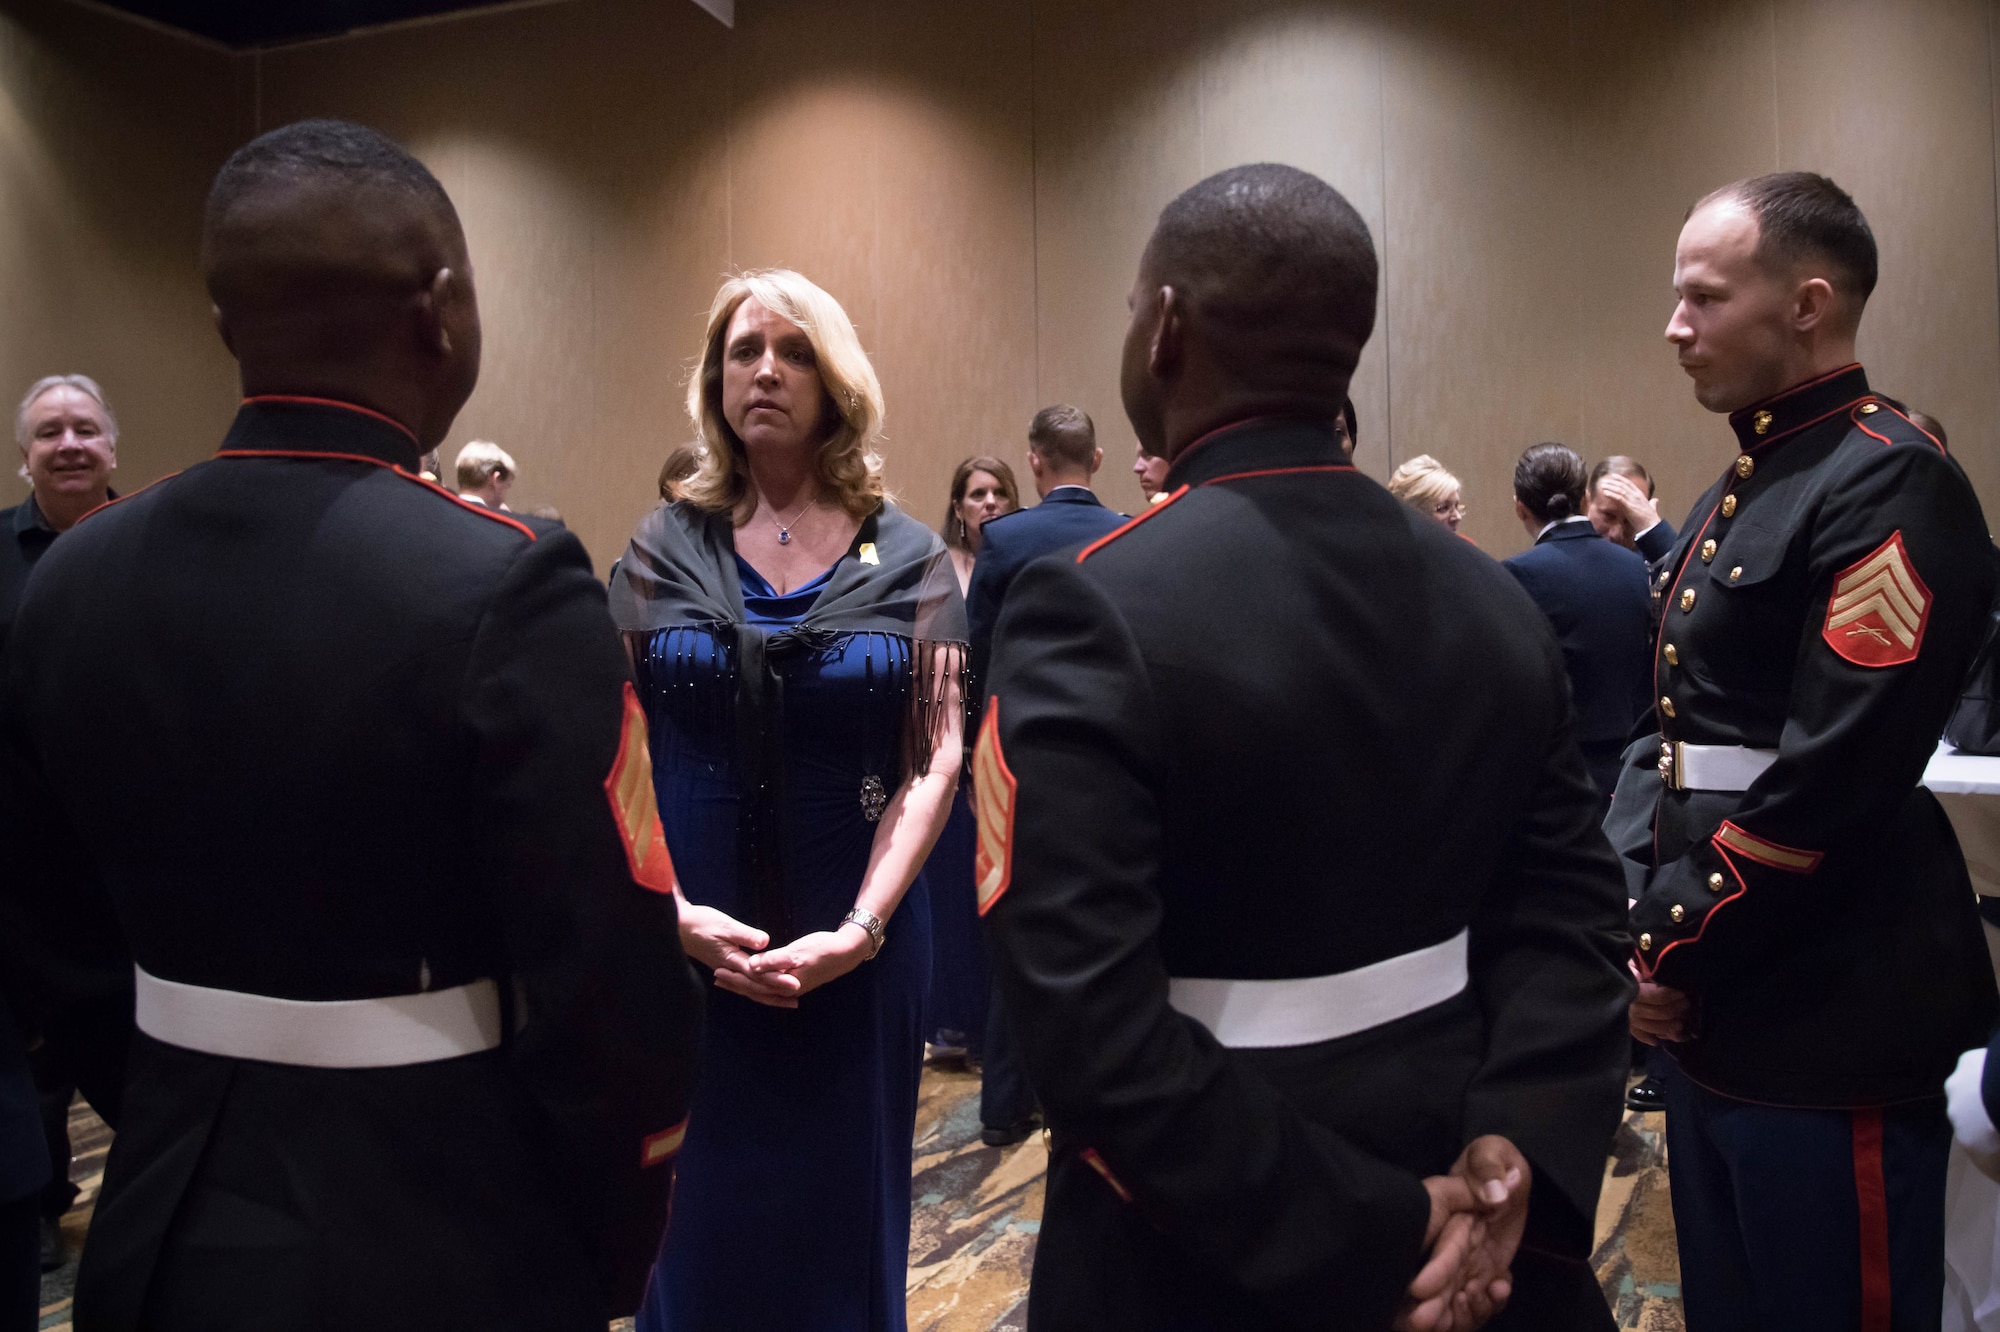 Secretary of the Air Force Deborah Lee James speaks
with Marines from Keesler Air Force Base's Marine detachment during the 38th Annual Salute to the Military event at the Gulf Coast Convention Center in Biloxi Miss. Oct. 25. (U.S. Air Force photo/Senior Airman Heather Heiney)